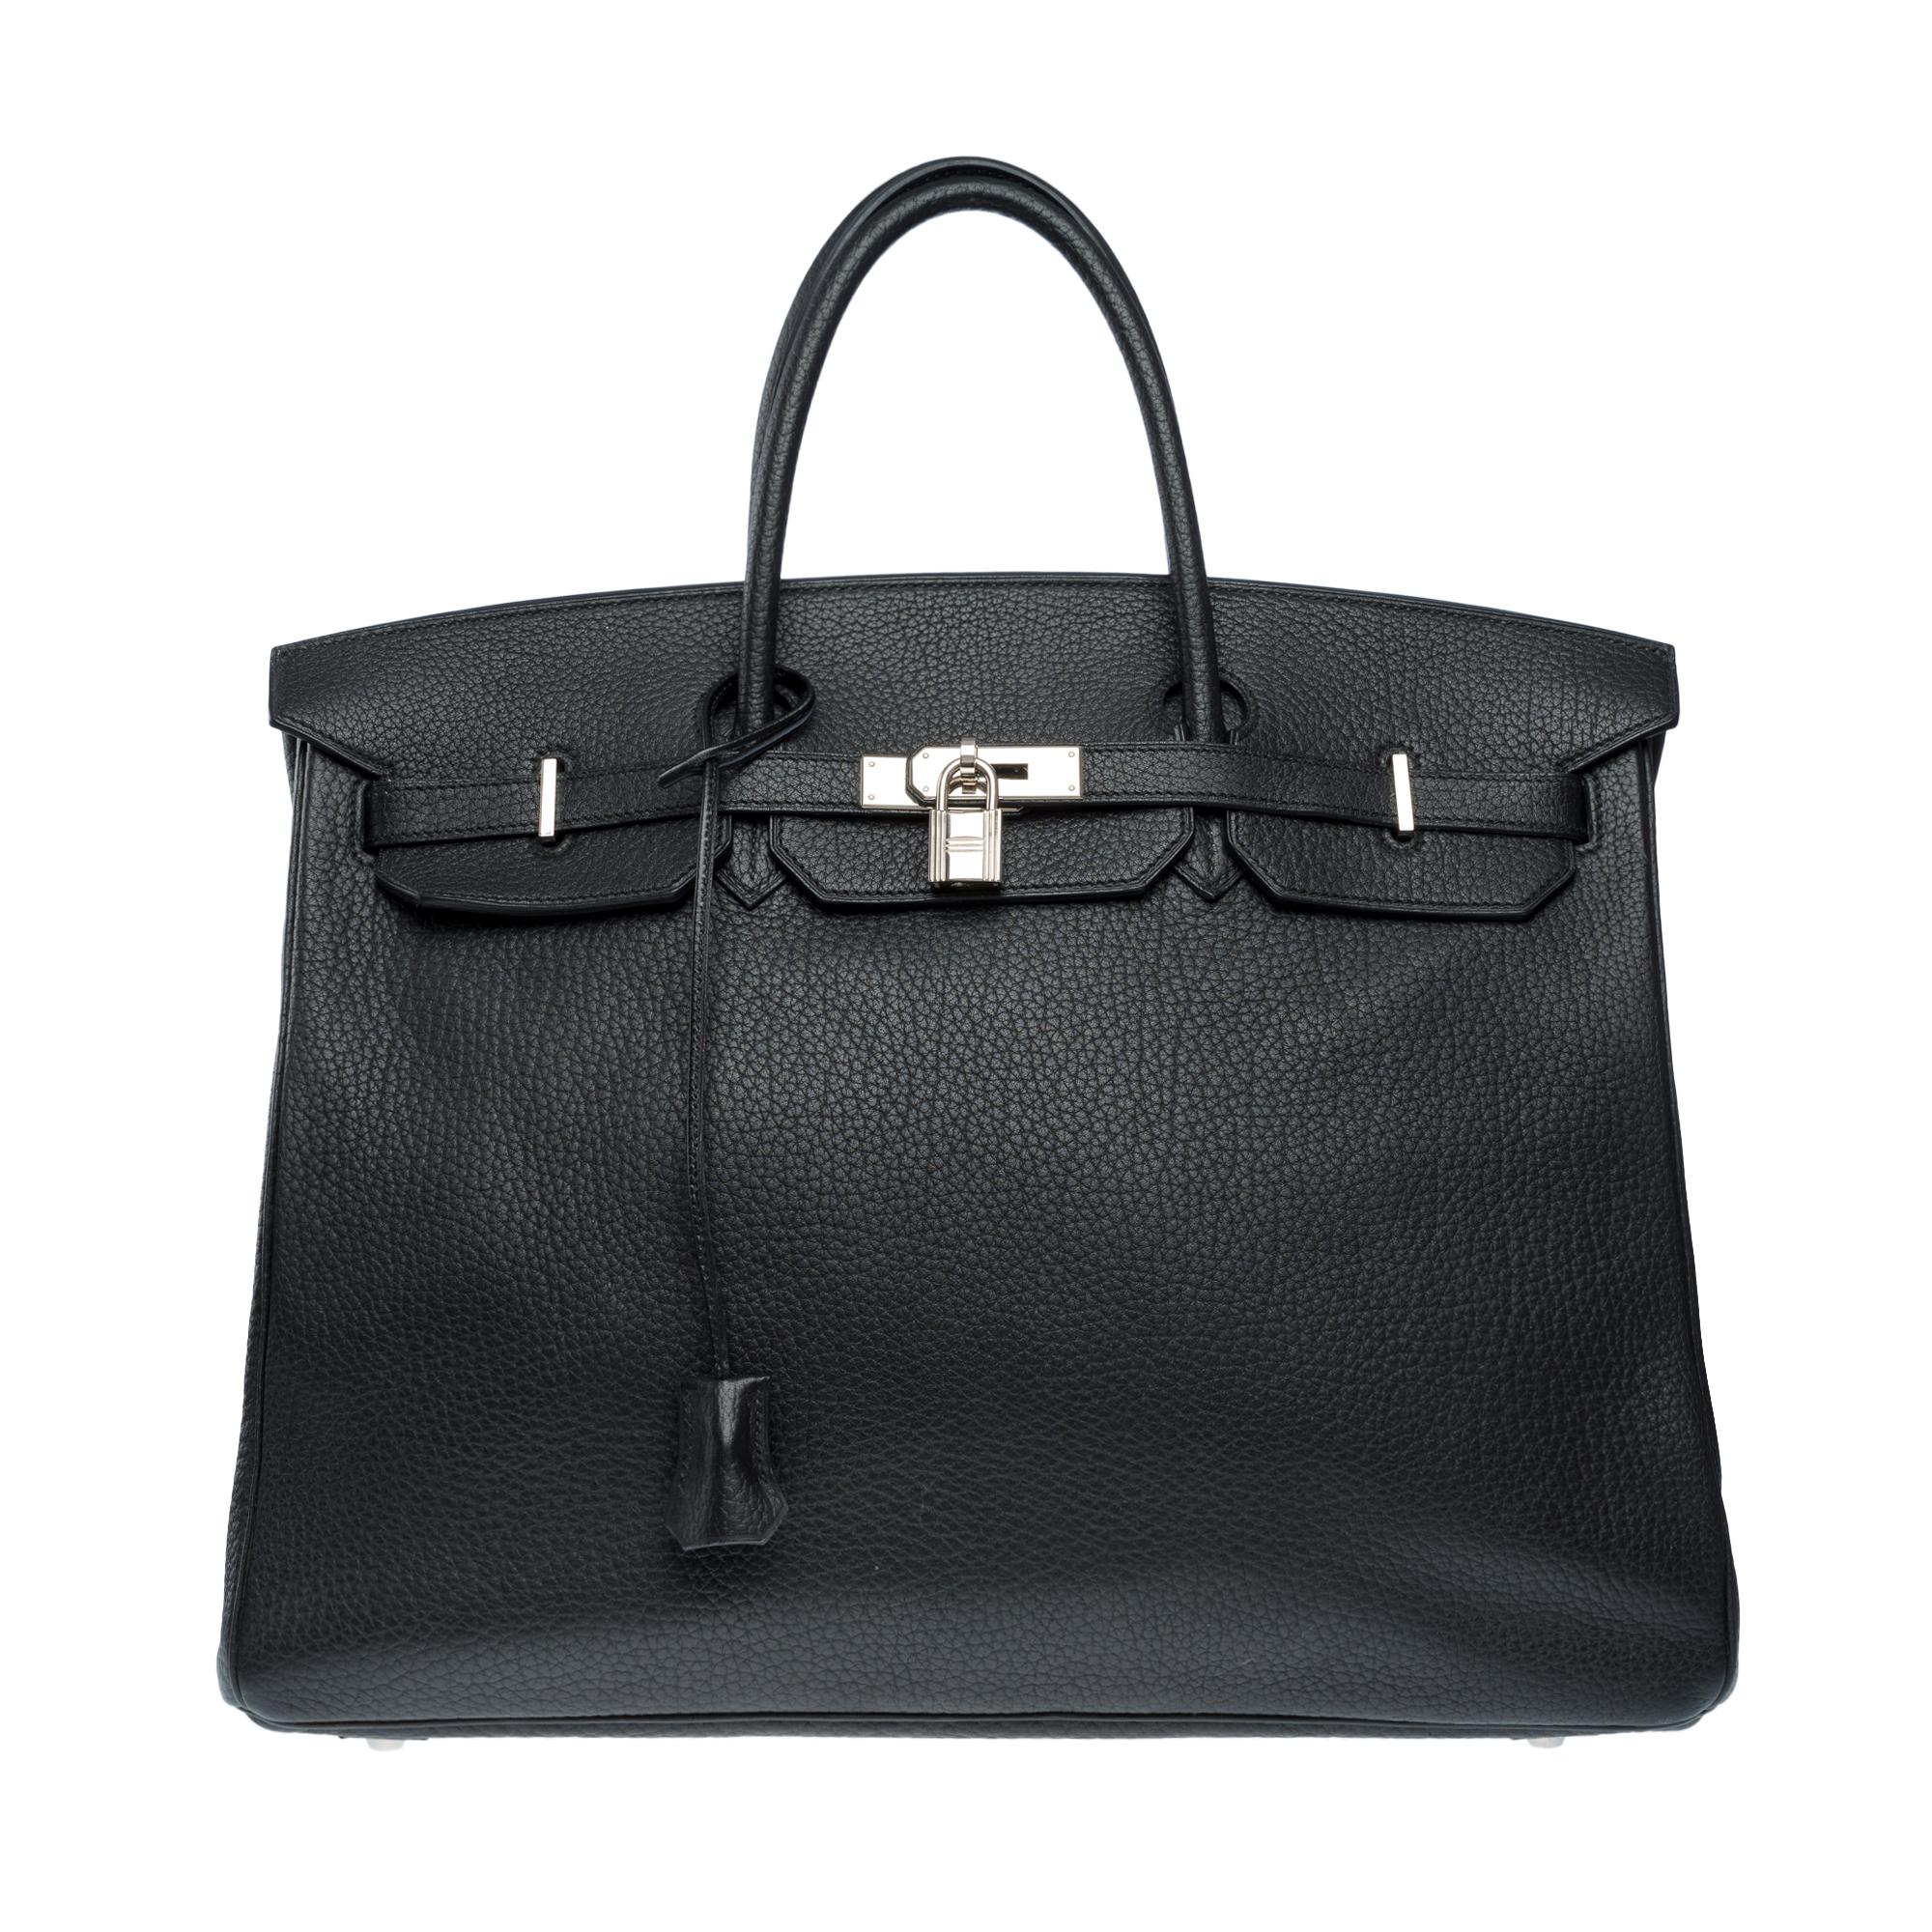 Beautiful Hermes Birkin 40 in Fjord black leather , palladium silver metal trim, double handle in black leather for a hand carry

Flap closure
Black leather inner lining, one zippered pocket, one patch pocket
Signature: 